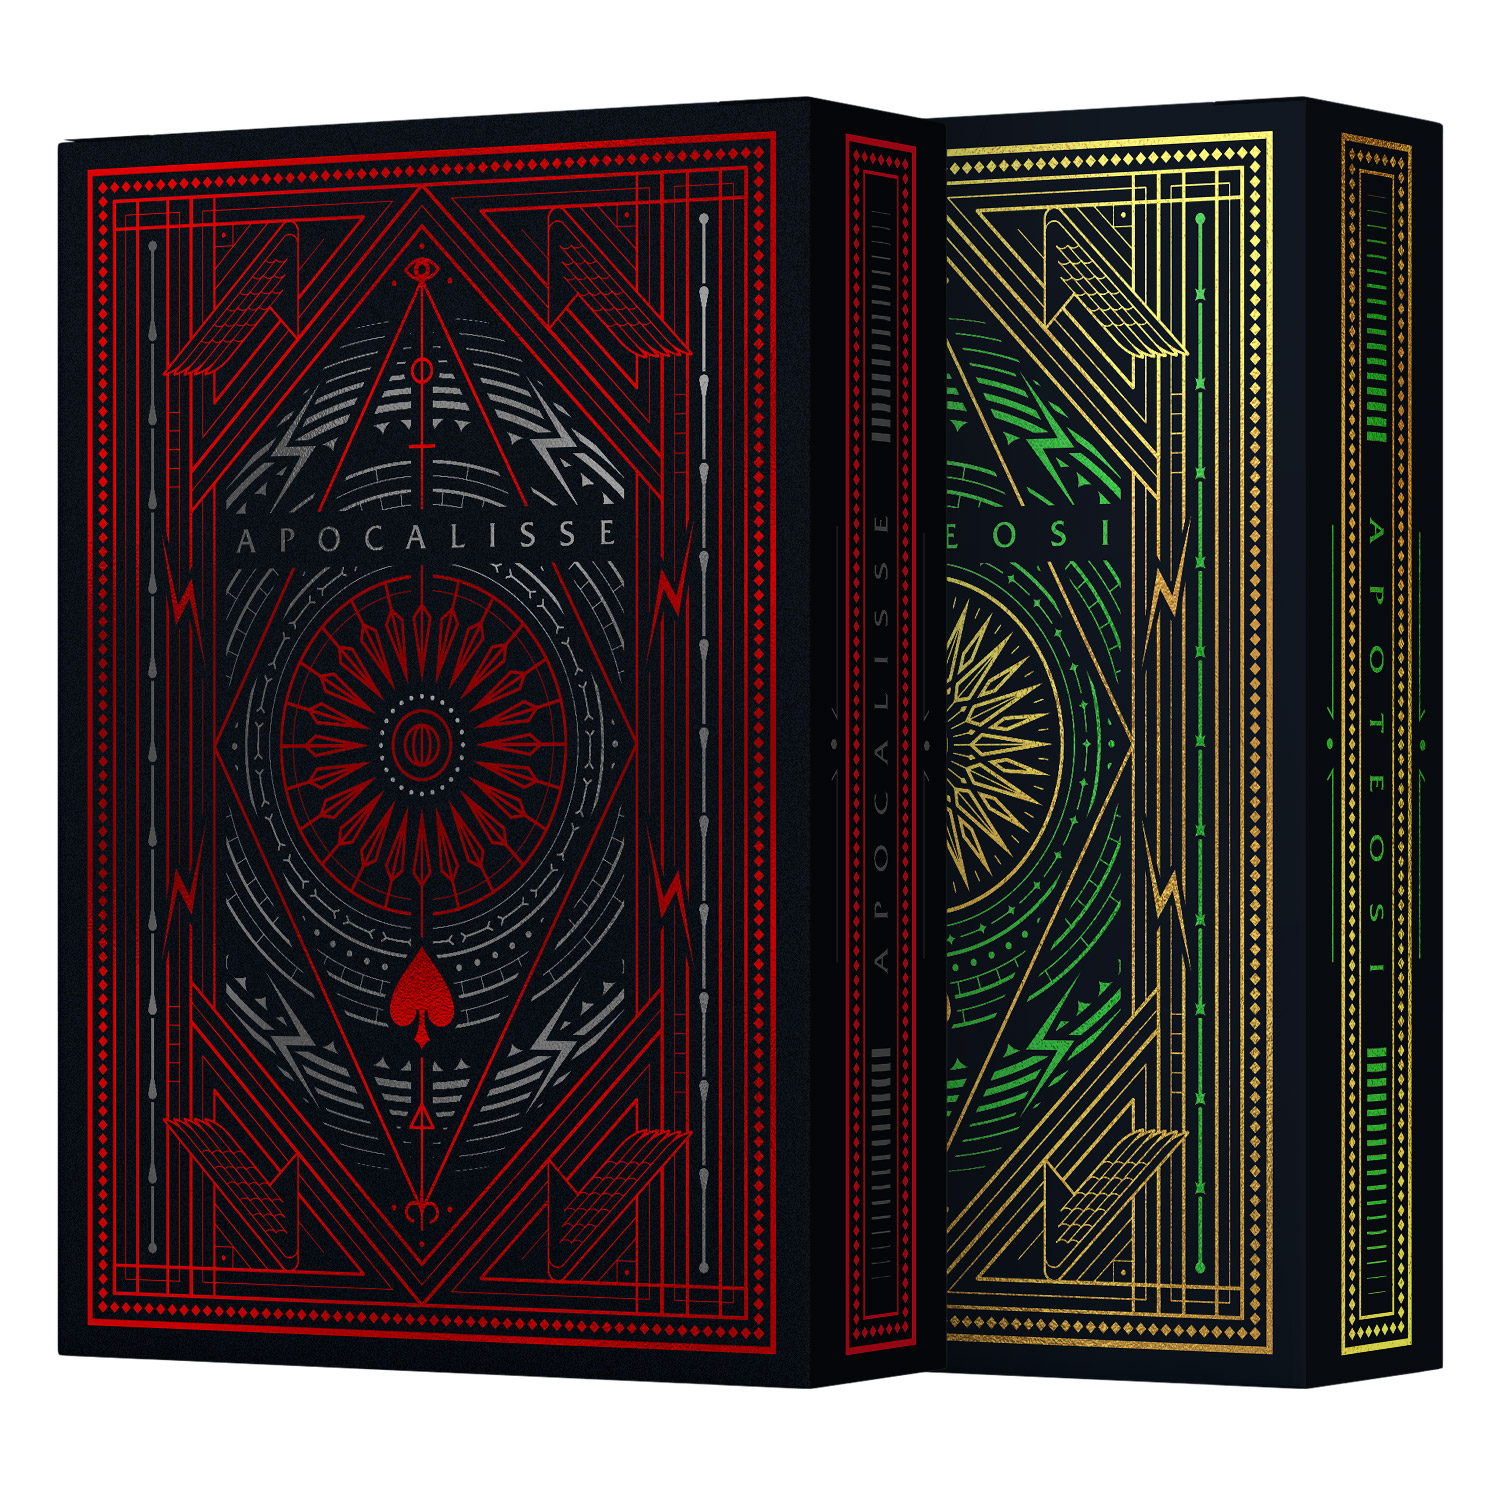 EDEN & HELL Collectors set gilded Luxury Poker Playing cards bundle- Only 200 printed!